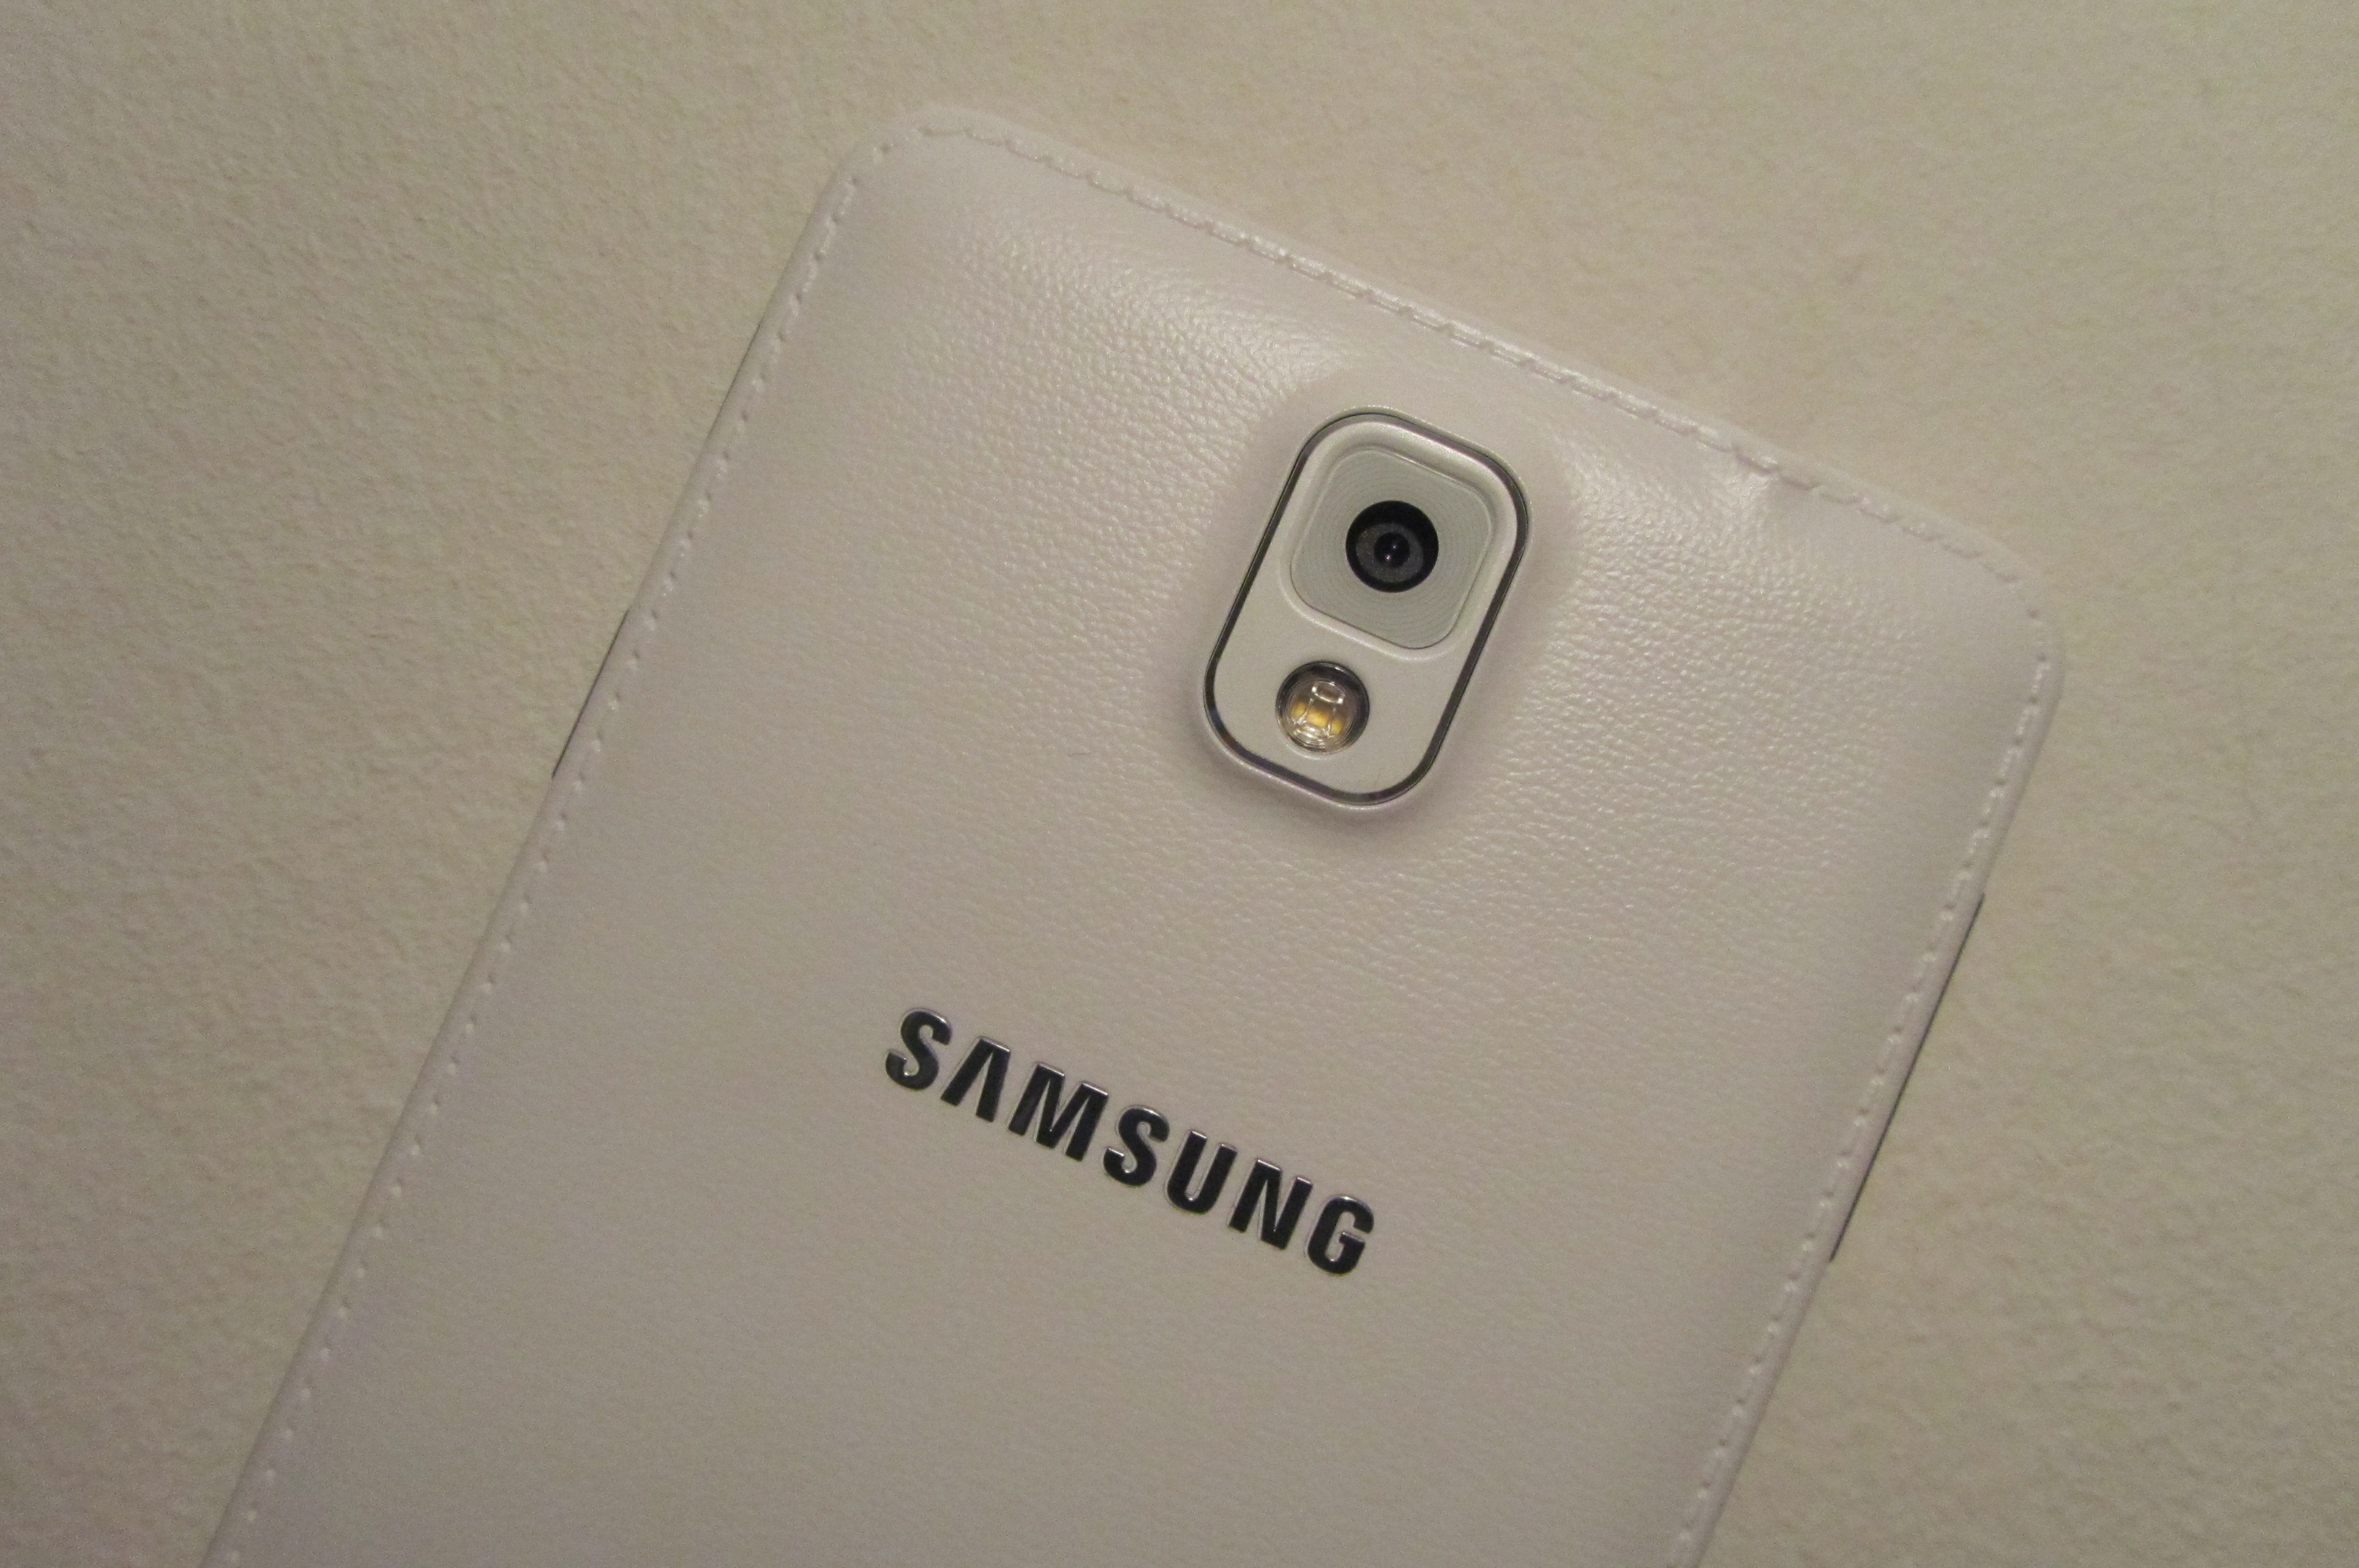 Camera Note3 Samsung Galaxy Note 3 review: One of the best Android handsets money can buy, if you can hold it